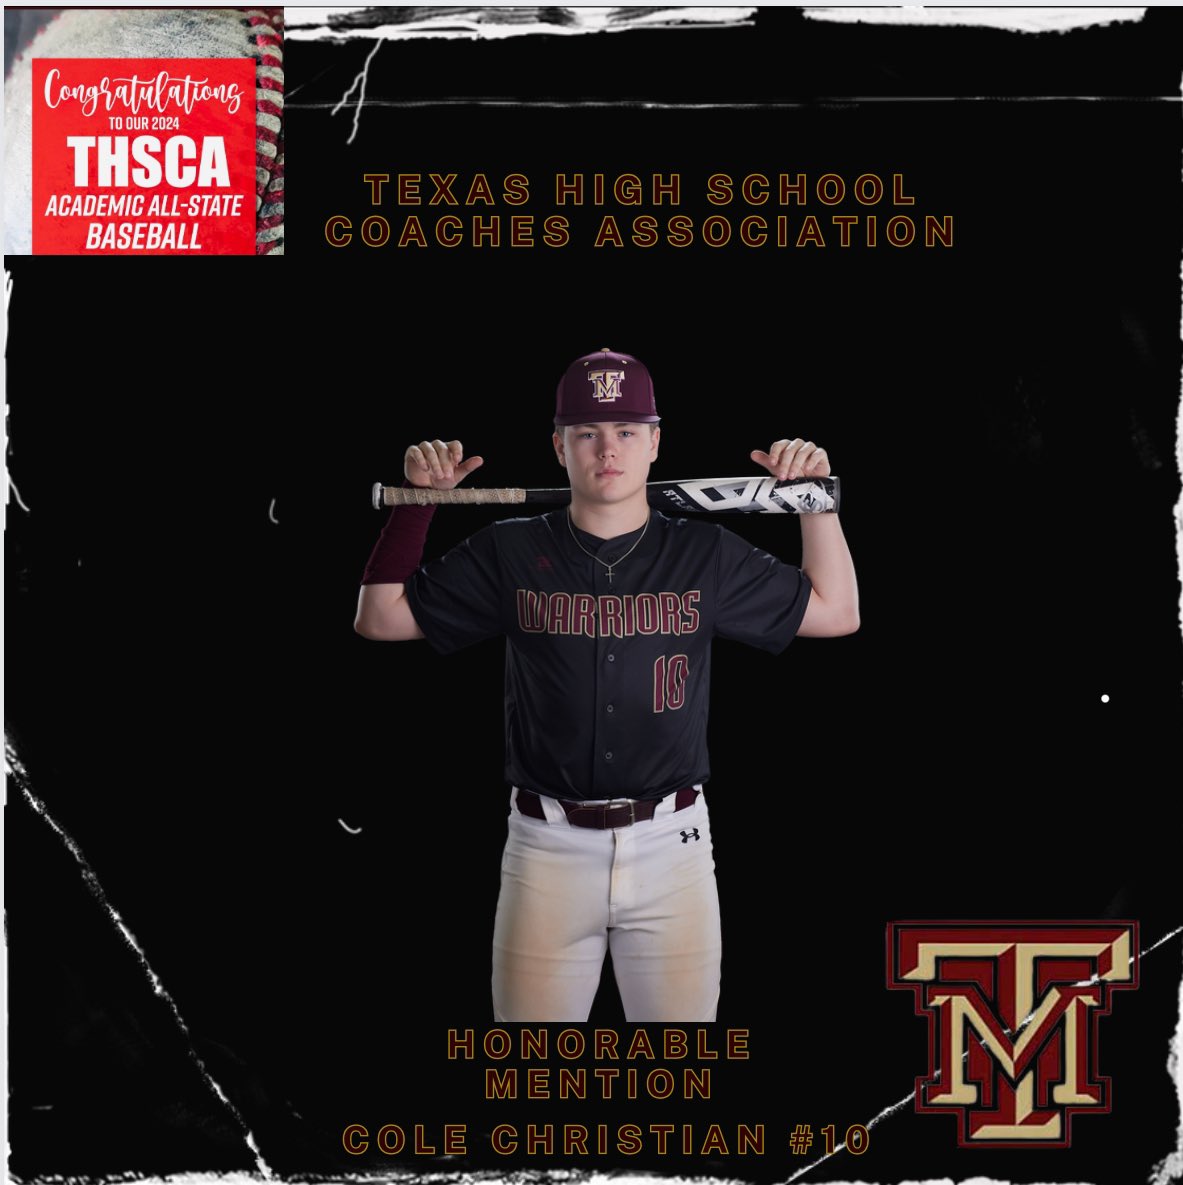 Congratulations @TMWarriorBSBL Cole Christian @THSCAcoaches Academic All-State #ShowTime